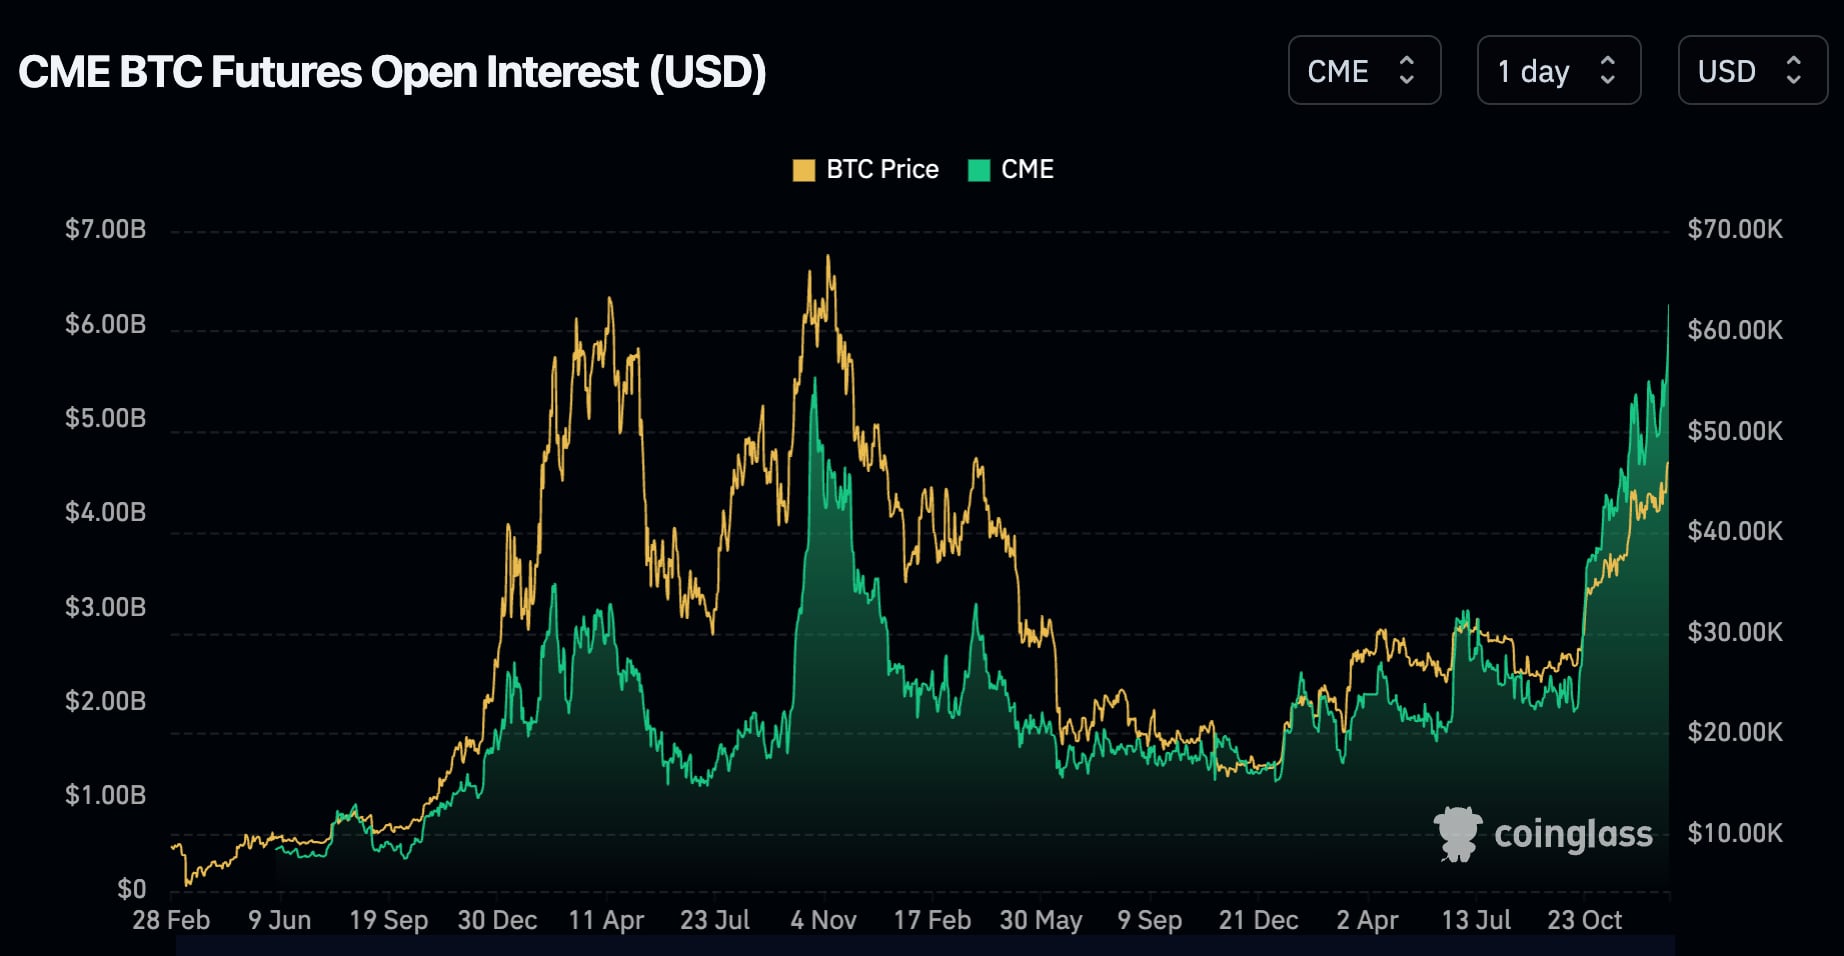 Bitcoin Futures Open Interest Reaches All-Time Highs as Leverage Surges